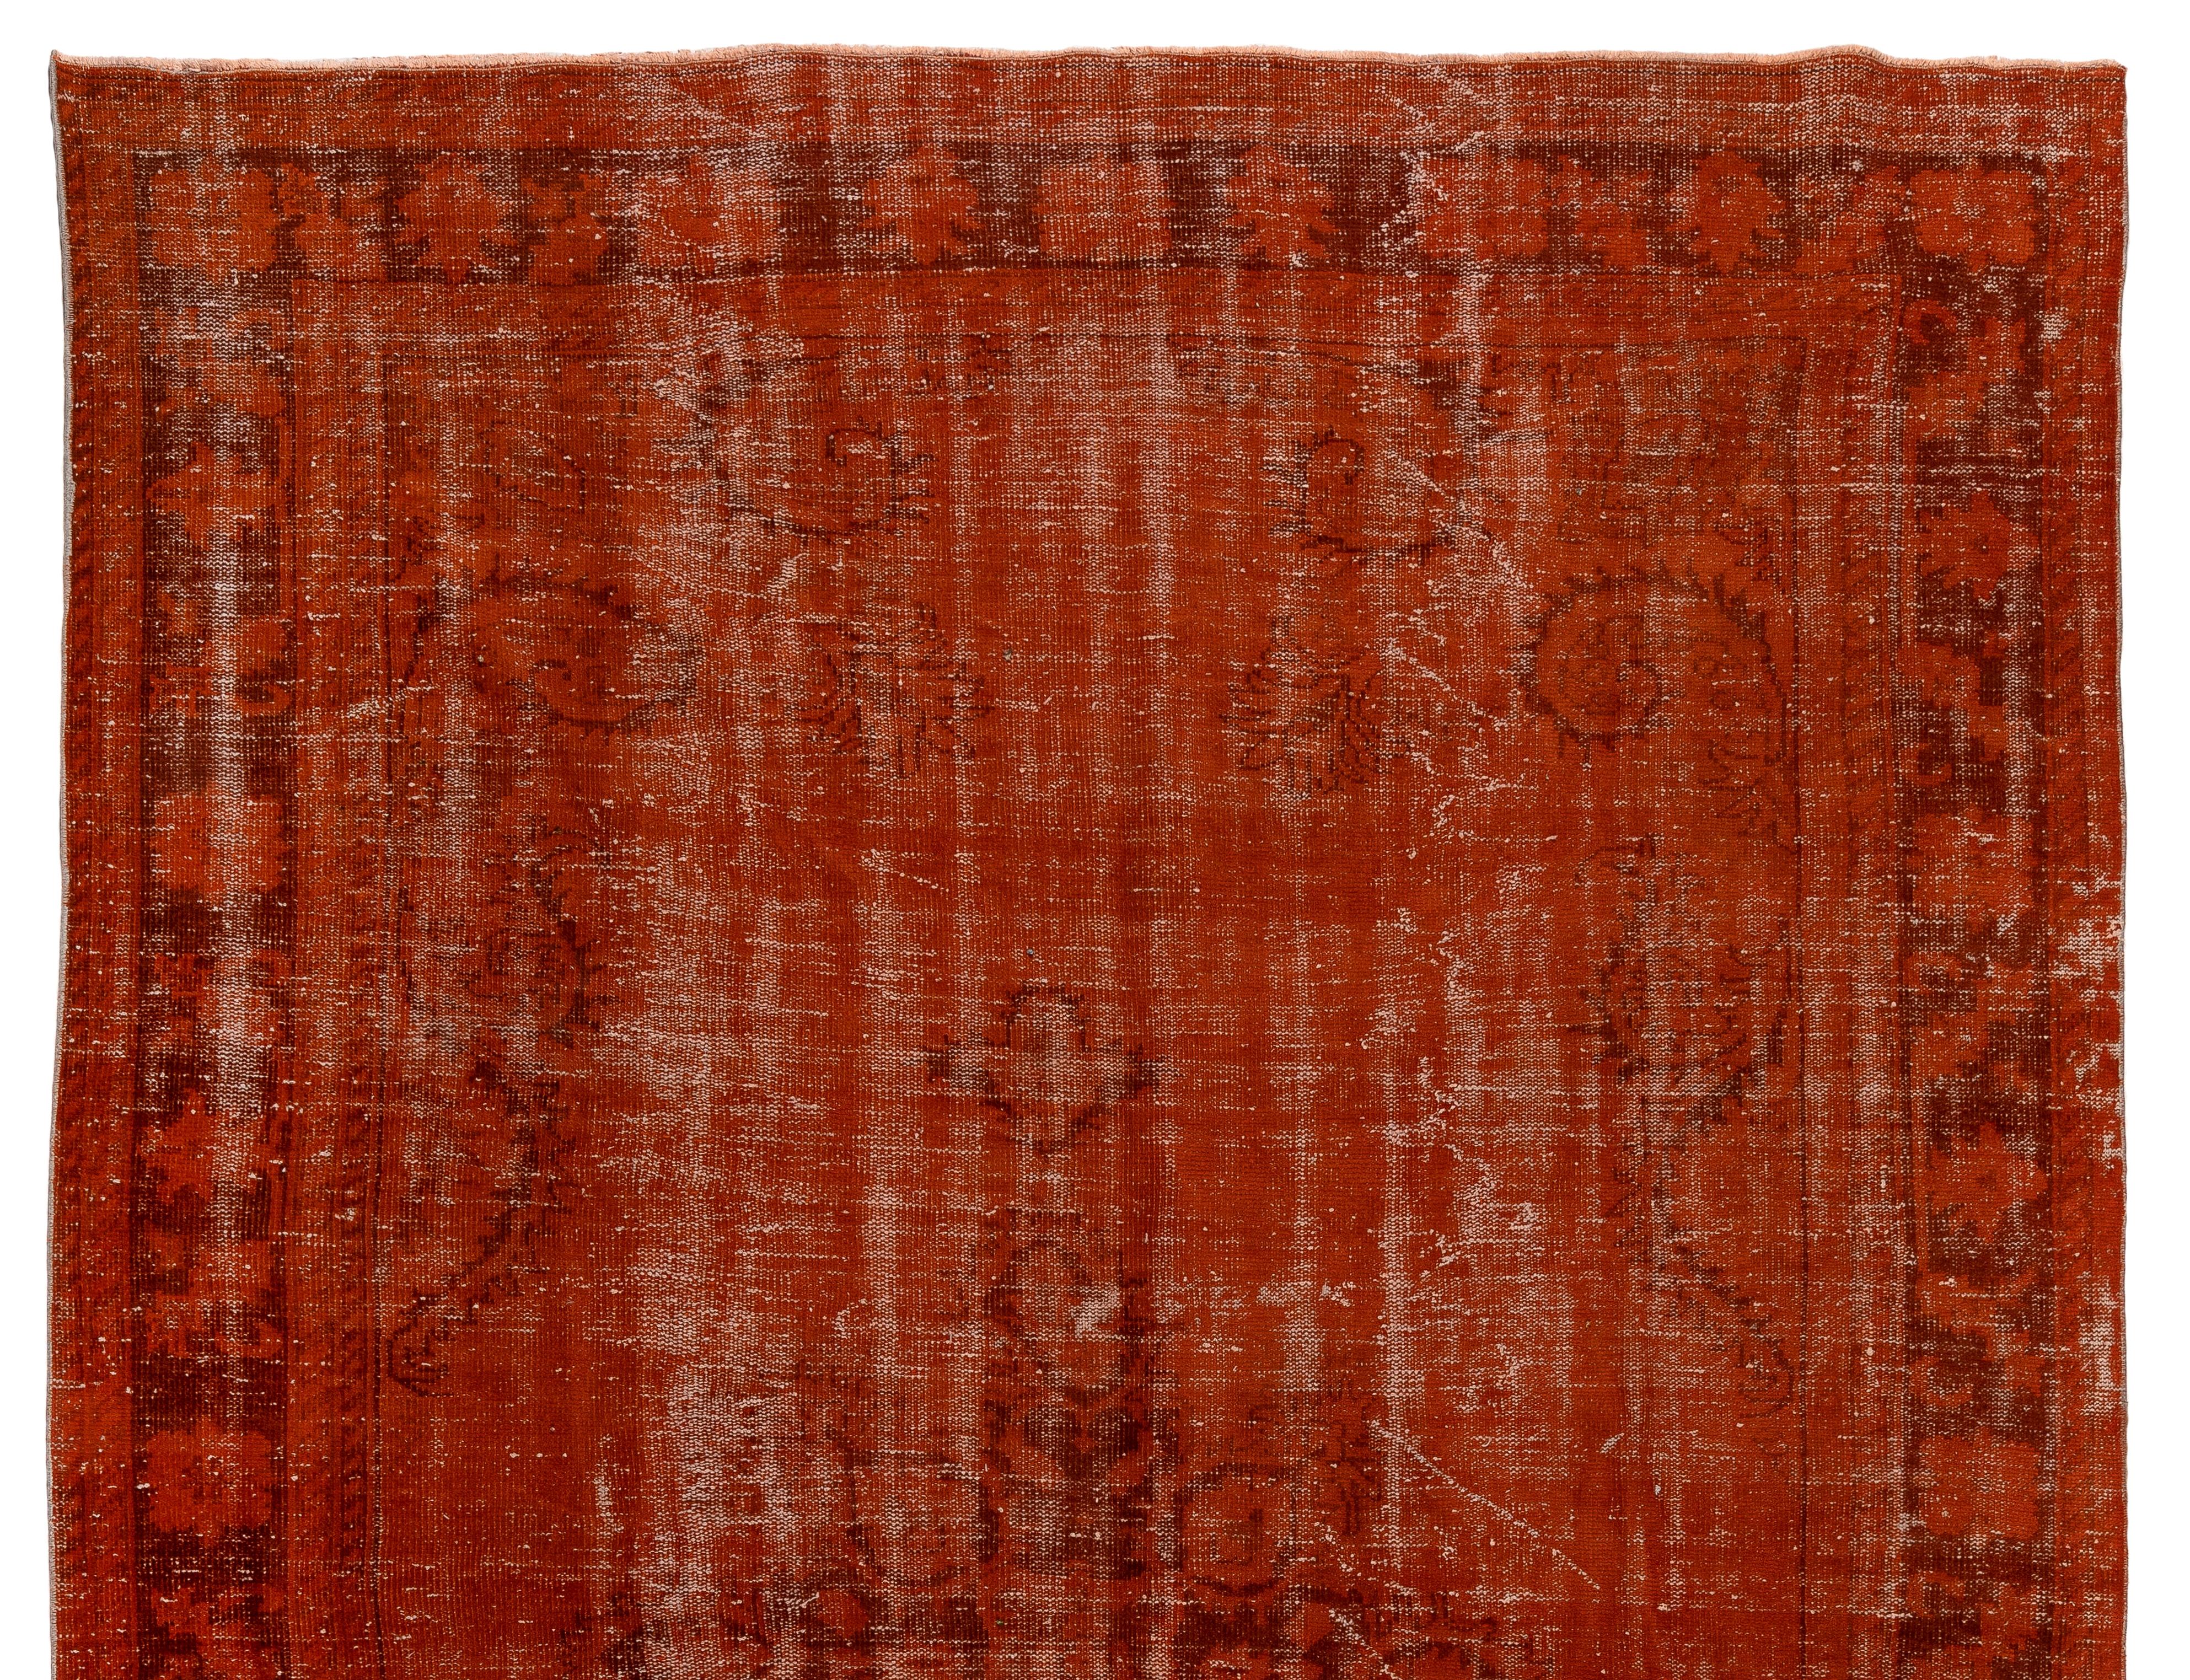 A vintage distressed Turkish rug re-dyed in orange color.
Finely hand knotted, low wool pile on cotton foundation. Deep washed.
Sturdy and can be used on a high traffic area, suitable for both residential and commercial interiors. Measures: 7.6 x